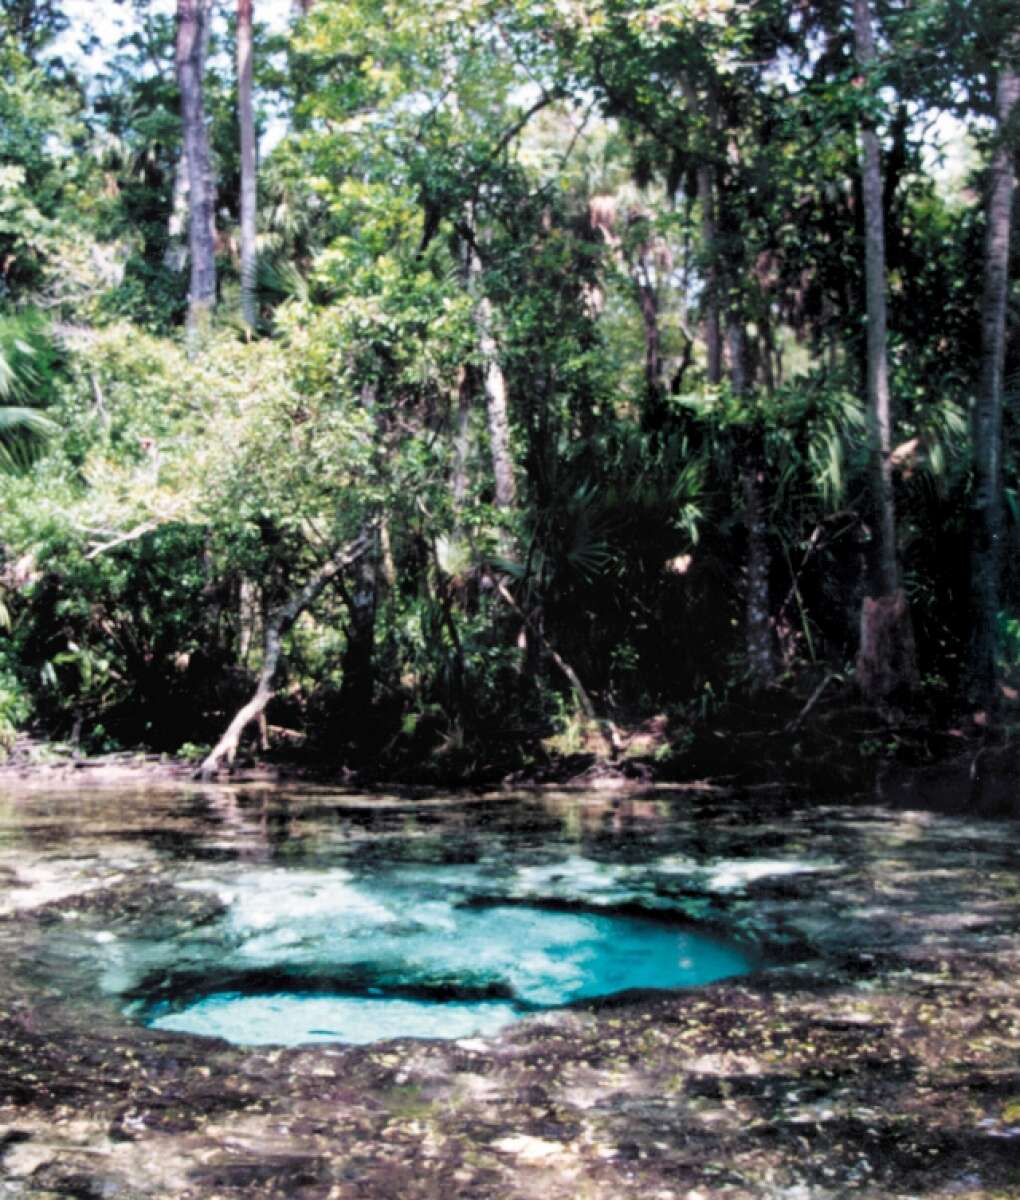 View of the Chassahowitzka River, near where Elvis was filming, an area whose natural beauty delighted Elvis